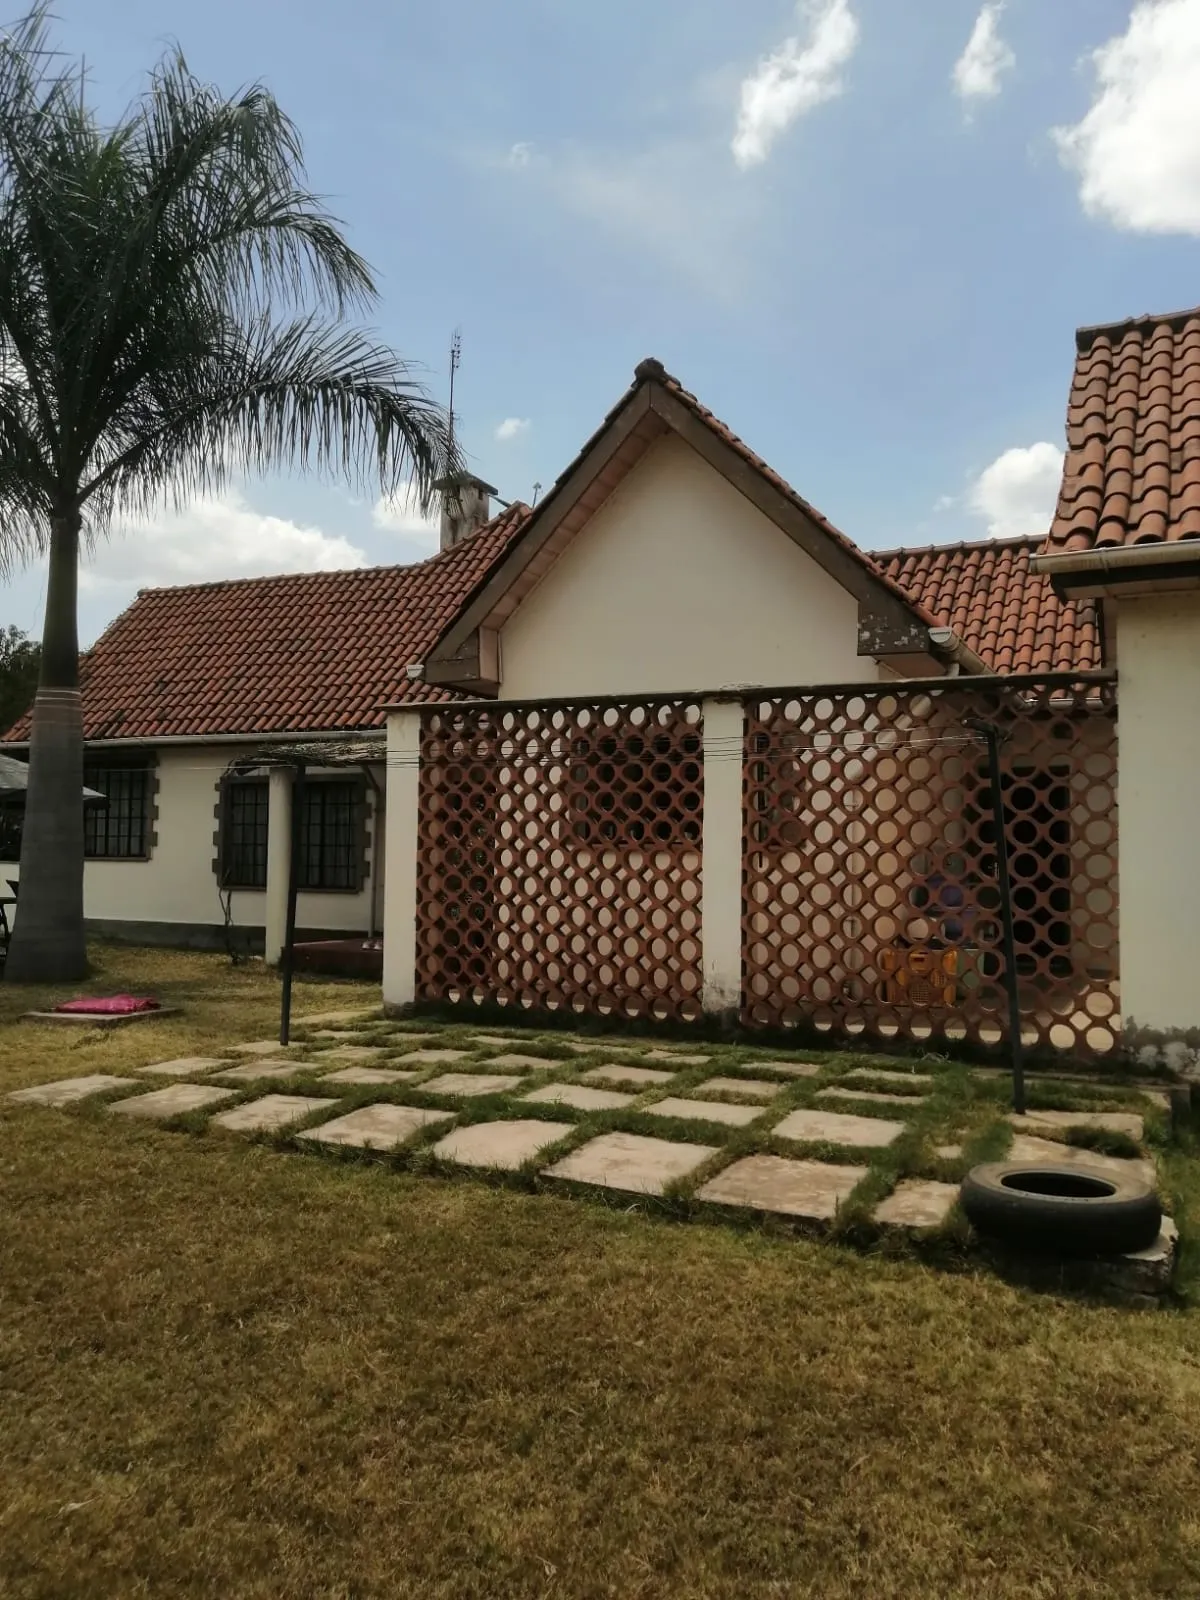 Real Estate House/Apartment For Sale-4 bedroom bungalow Karen near Nairobi academy on 1/2 acre 55m EXCLUSIVE! 9